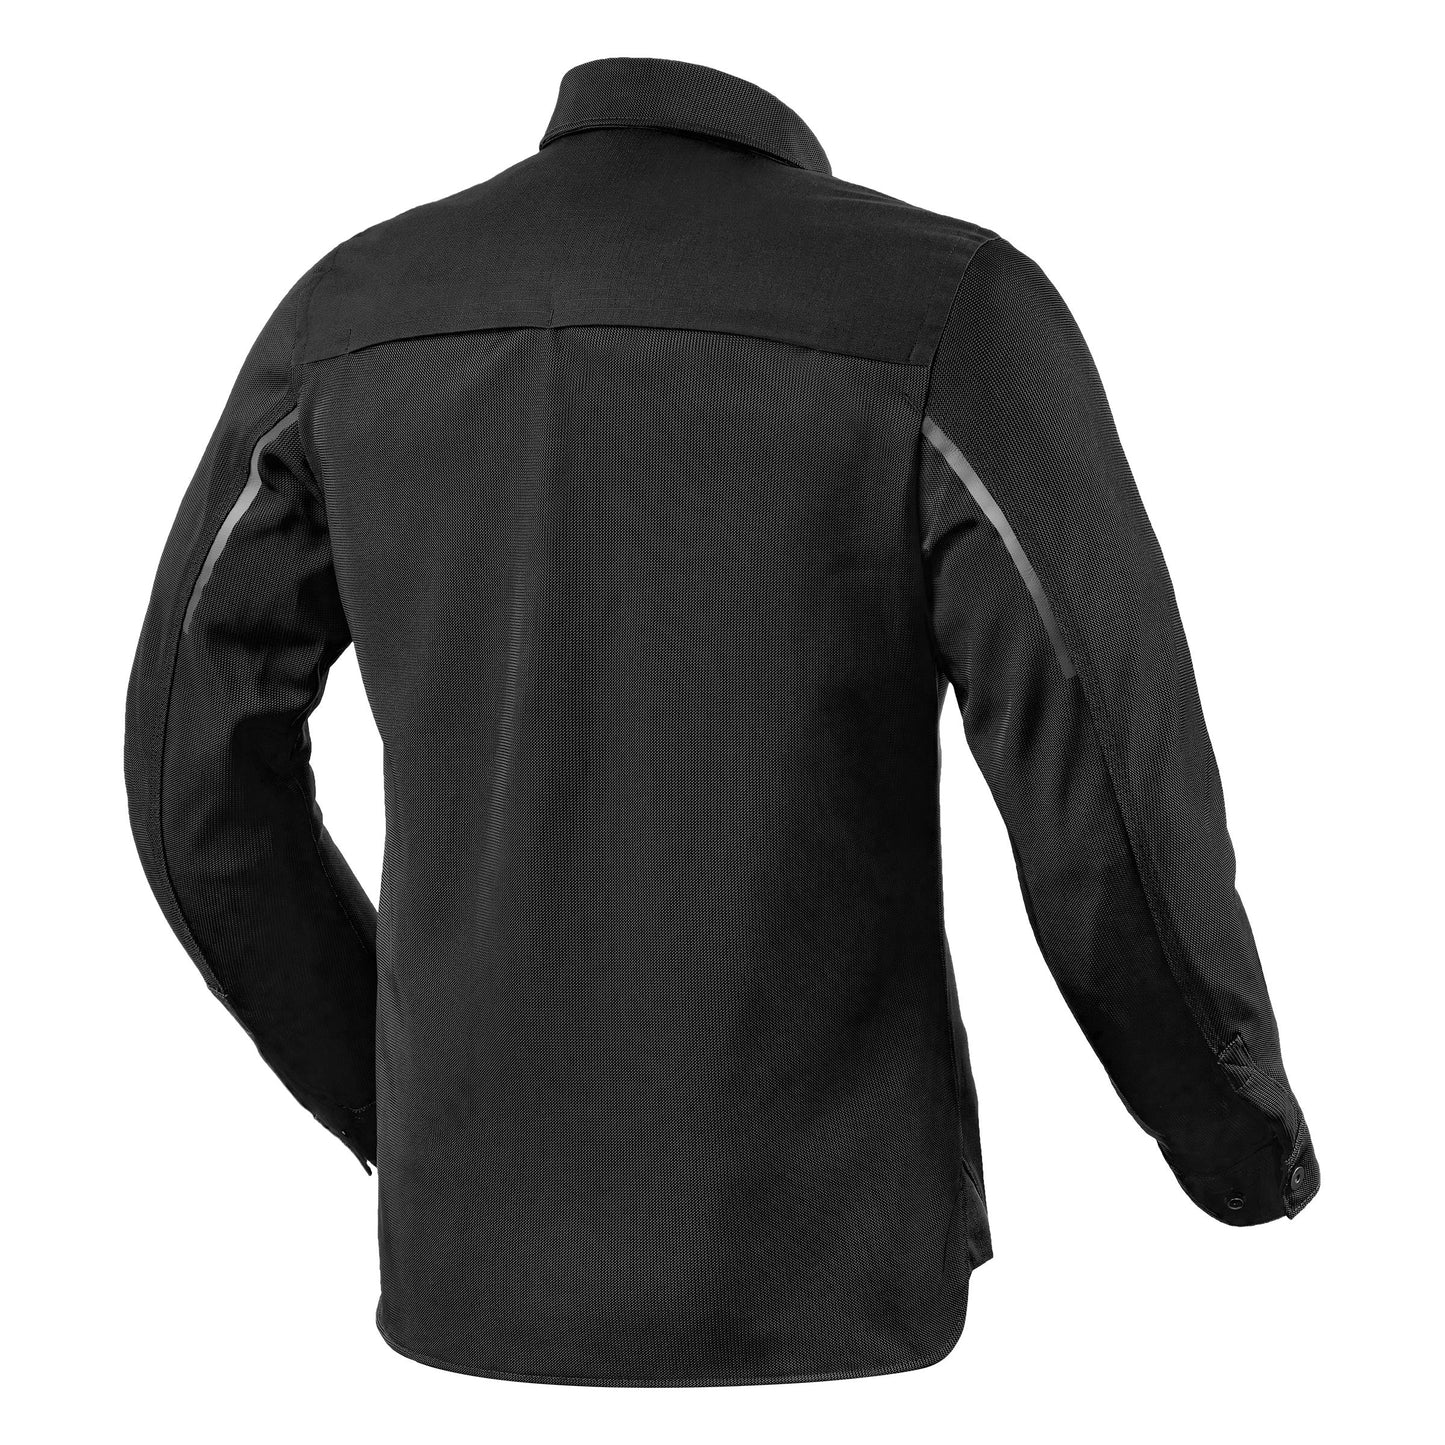 REV'IT! Tracer Air 2 Overshirt